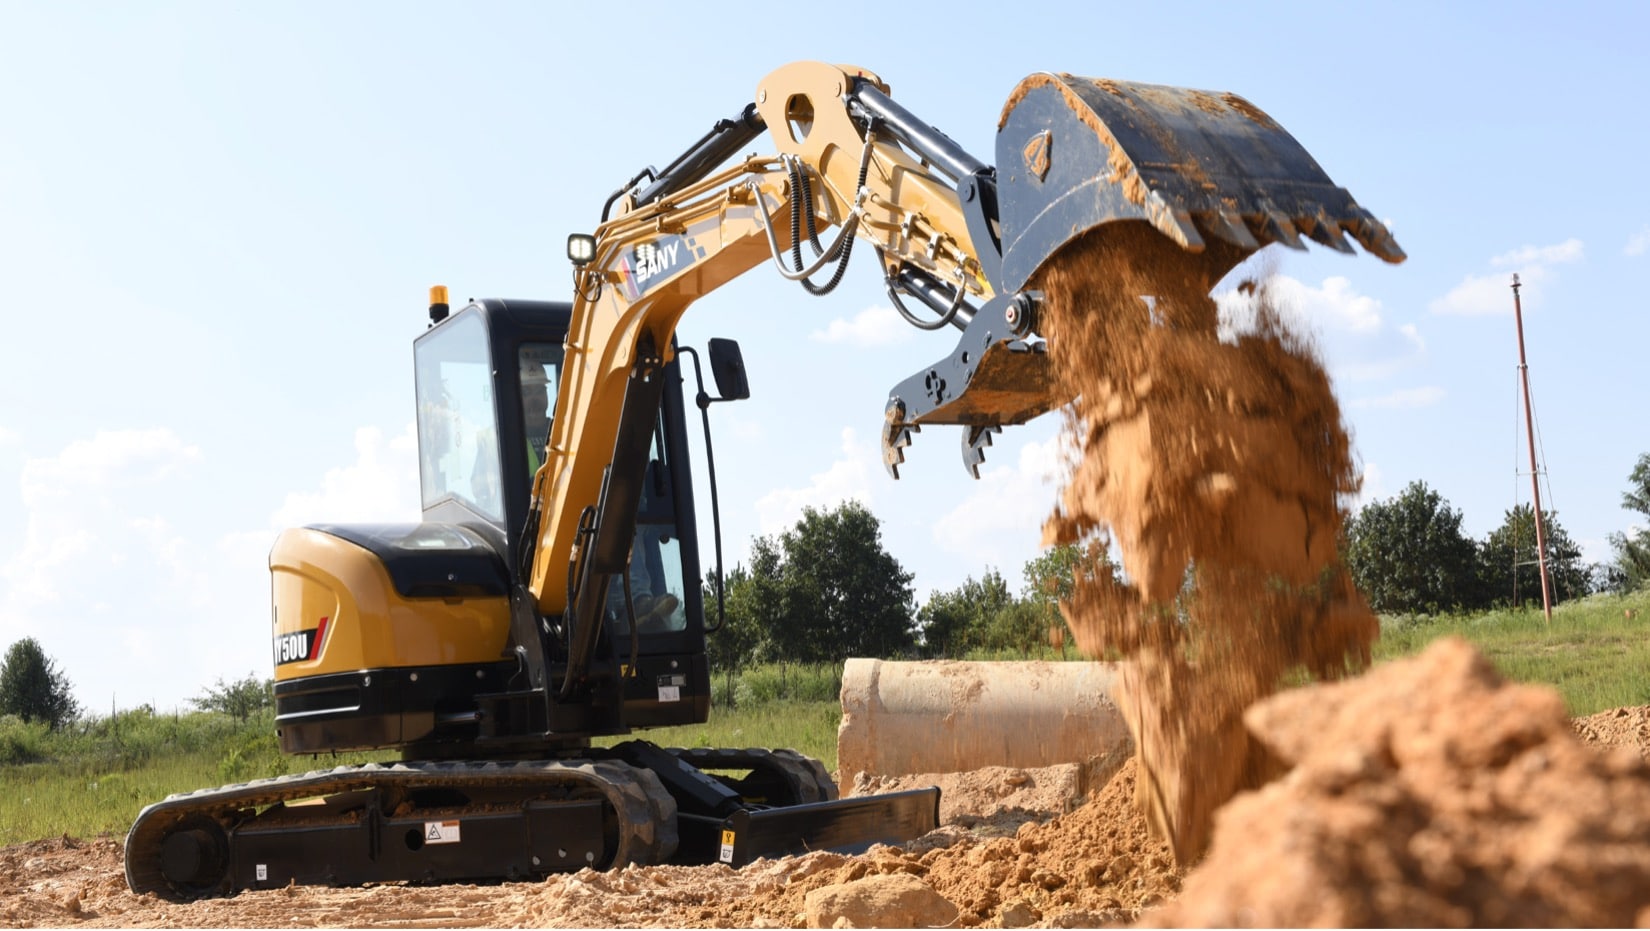 The Best Equipment and Service from Your Construction Equipment Dealer in KC